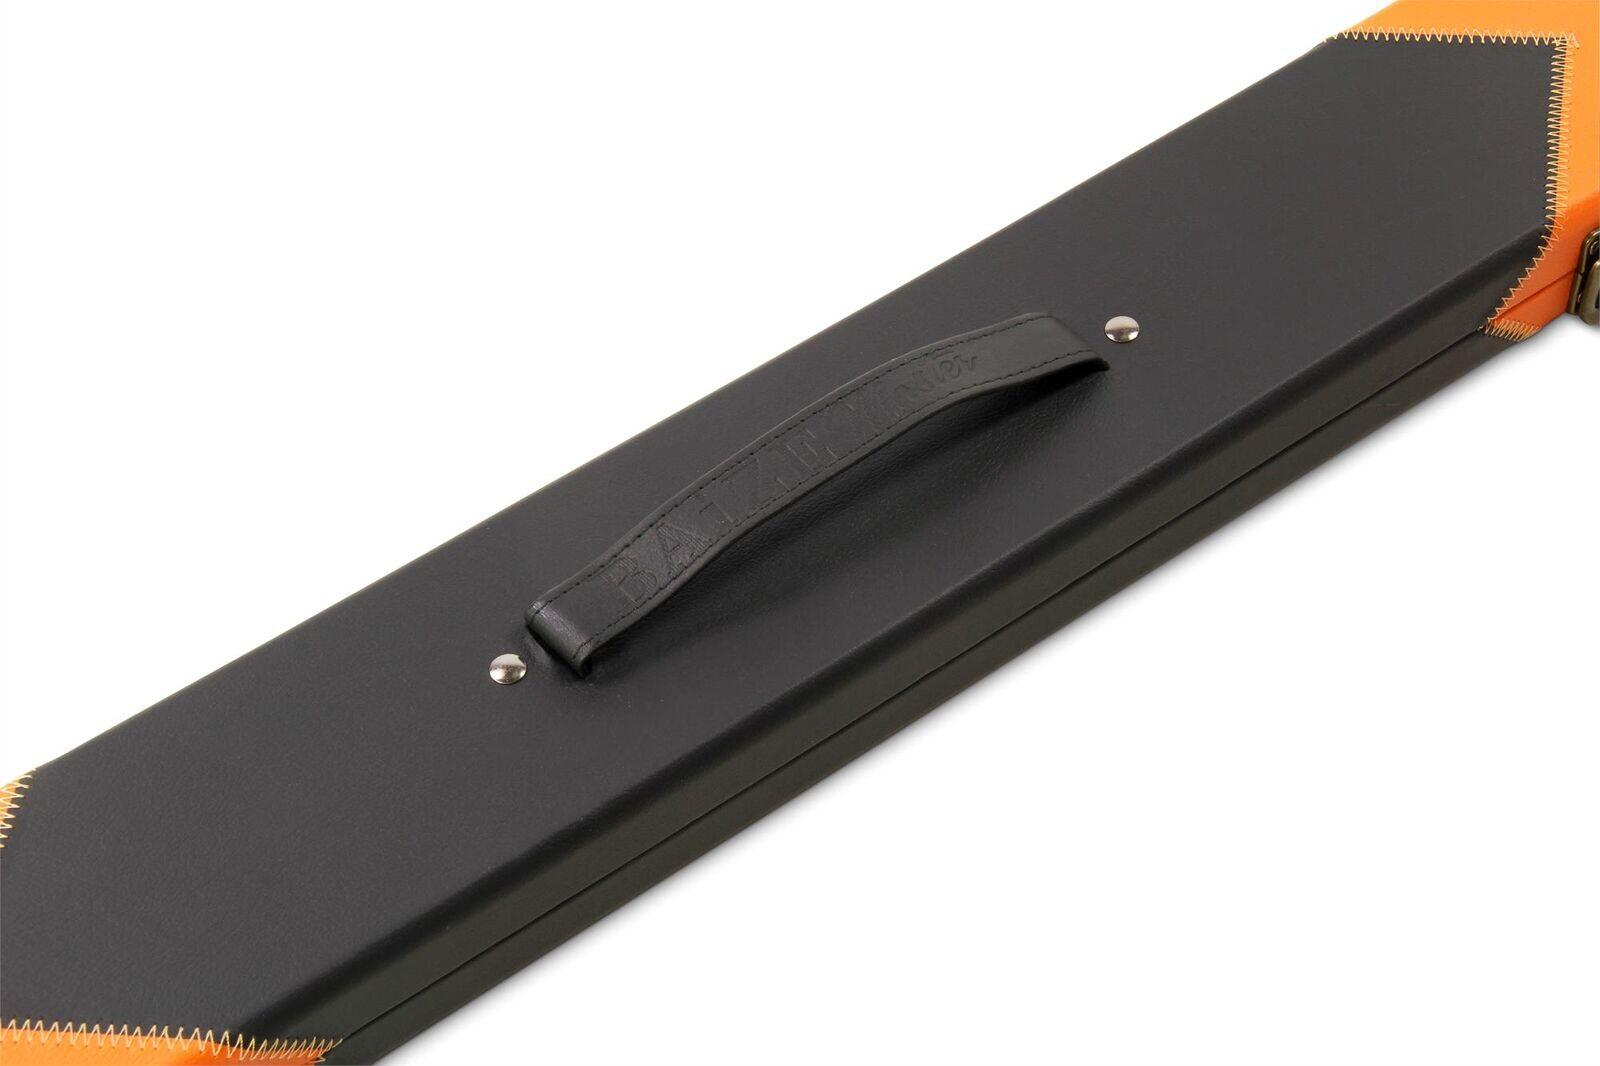 Baize Master 1 Piece WIDE ORANGE ARROW Snooker Pool Cue Case - Holds 3 Cues 4/7